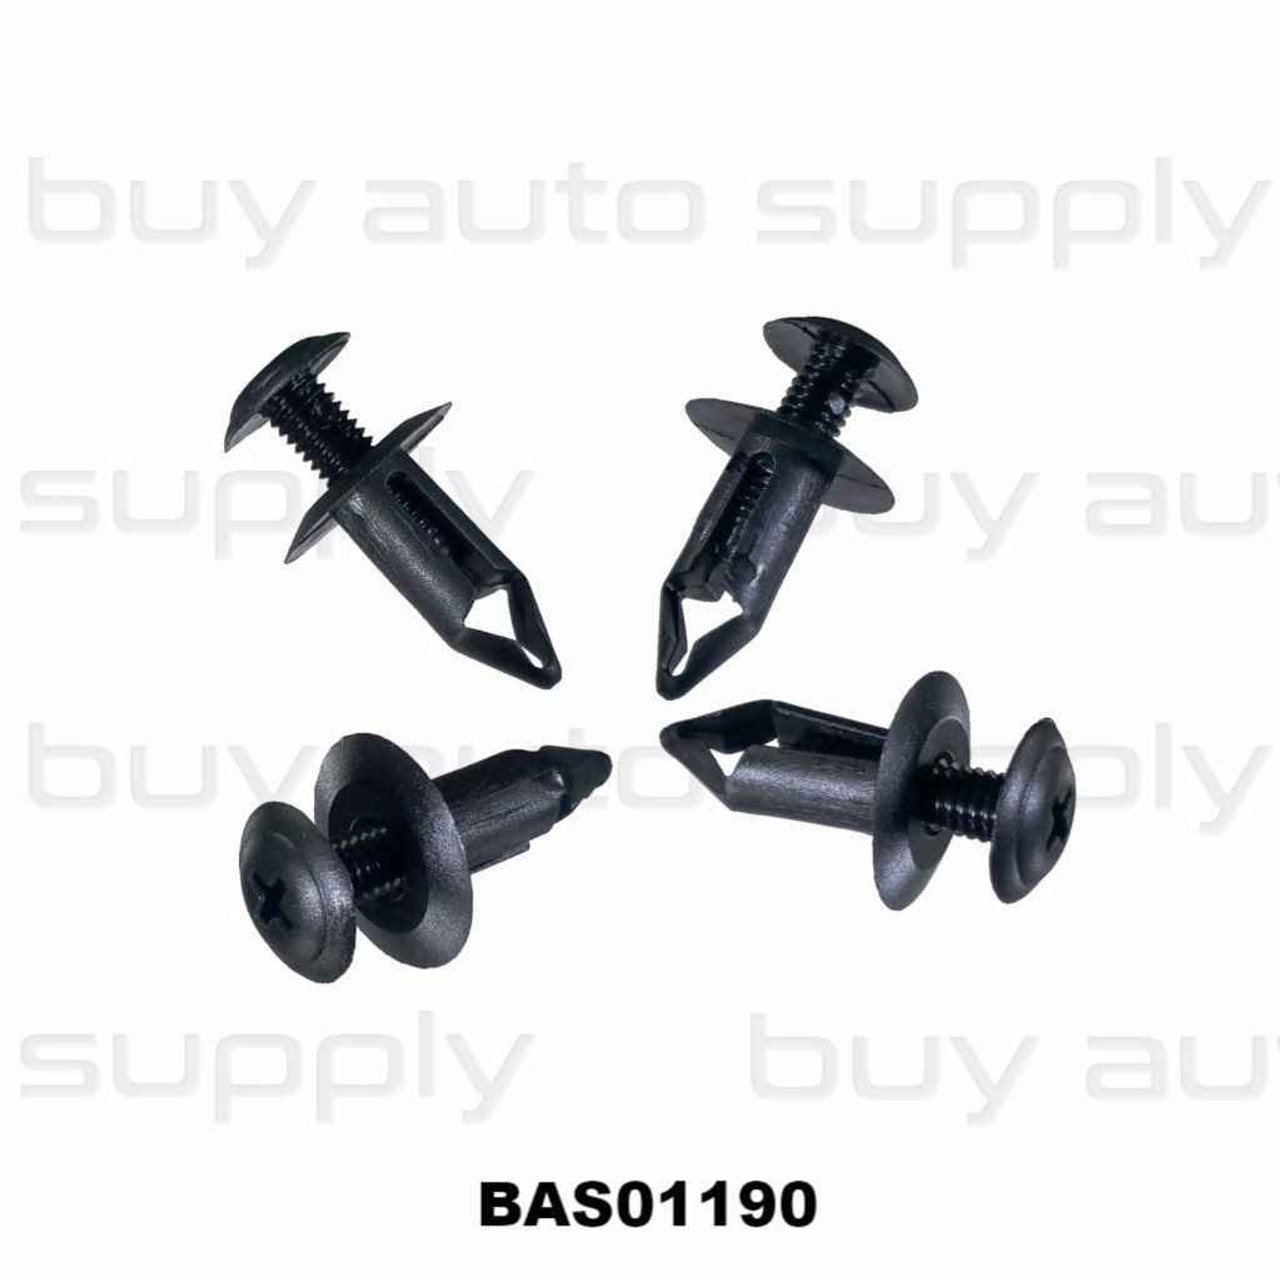 Nissan Push Retainer Clips - Fits 6mm Hole